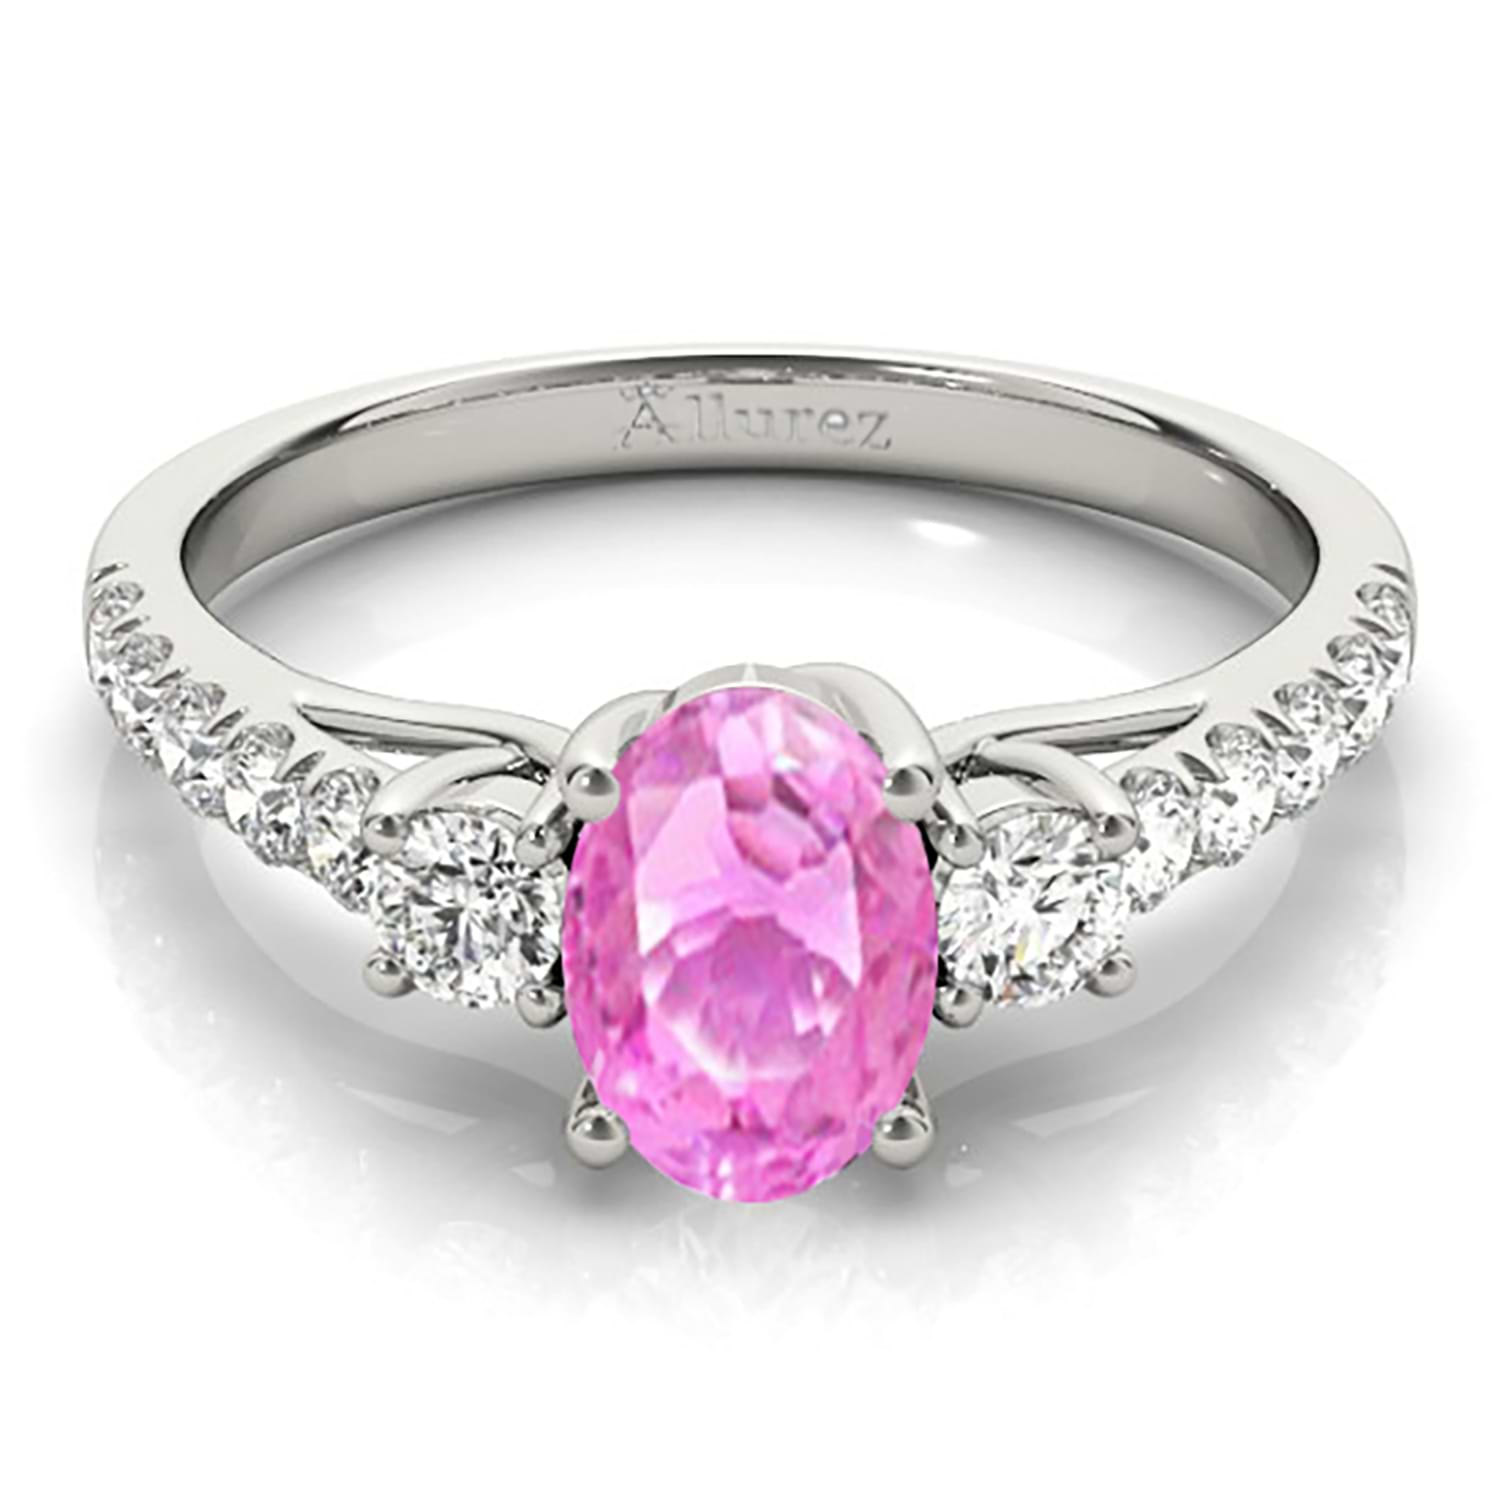 Oval Cut Pink Sapphire & Diamond Engagement Ring 14k White Gold (1.40ct)